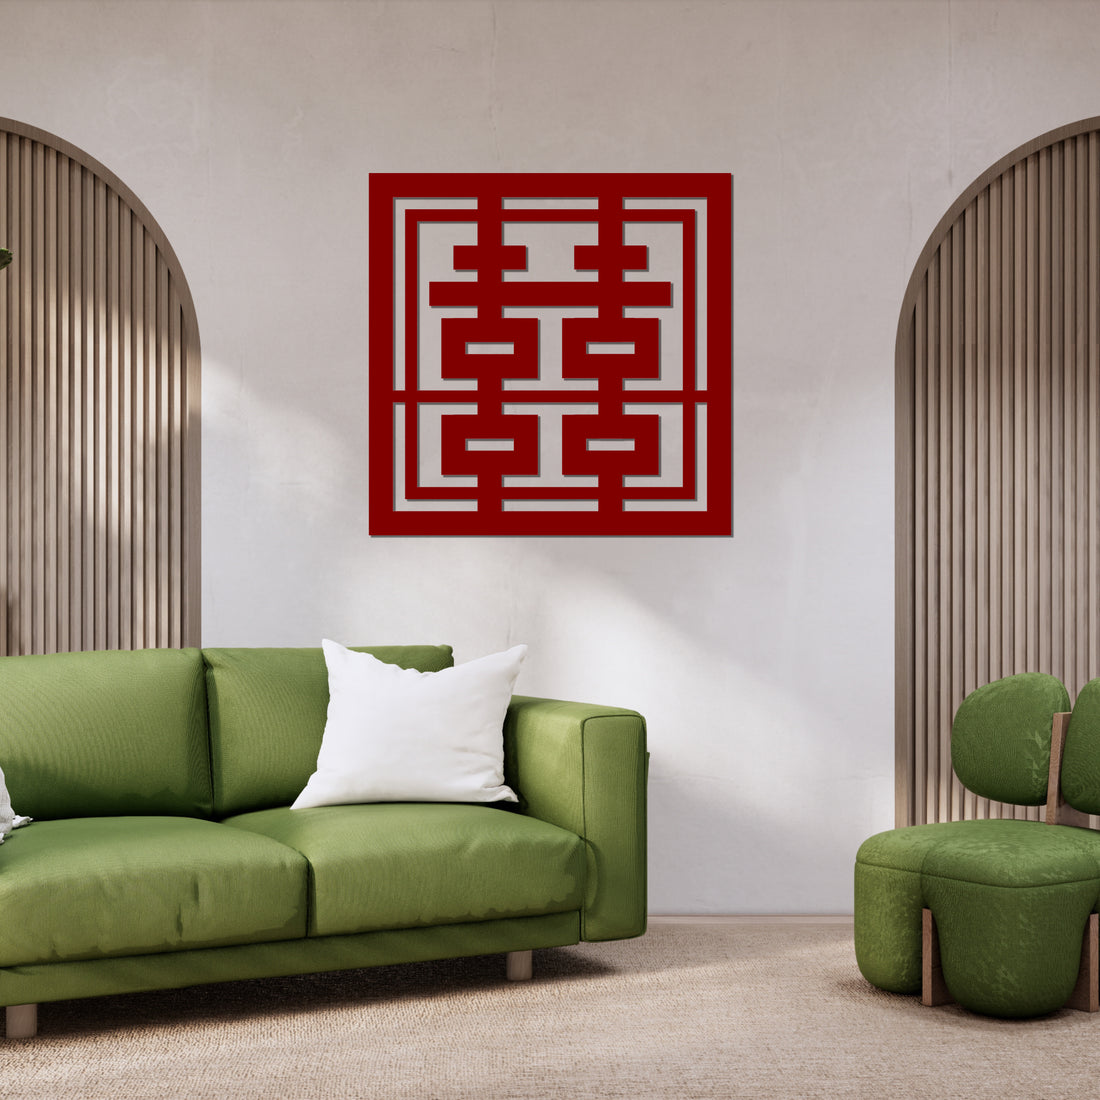 Custom Made Mirror Acrylic Square Modern Asian Wedding Sign, Chinese Double Happiness 囍, Hỷ Joy Tea Ceremony Signage, Event Wall Decor Hoop